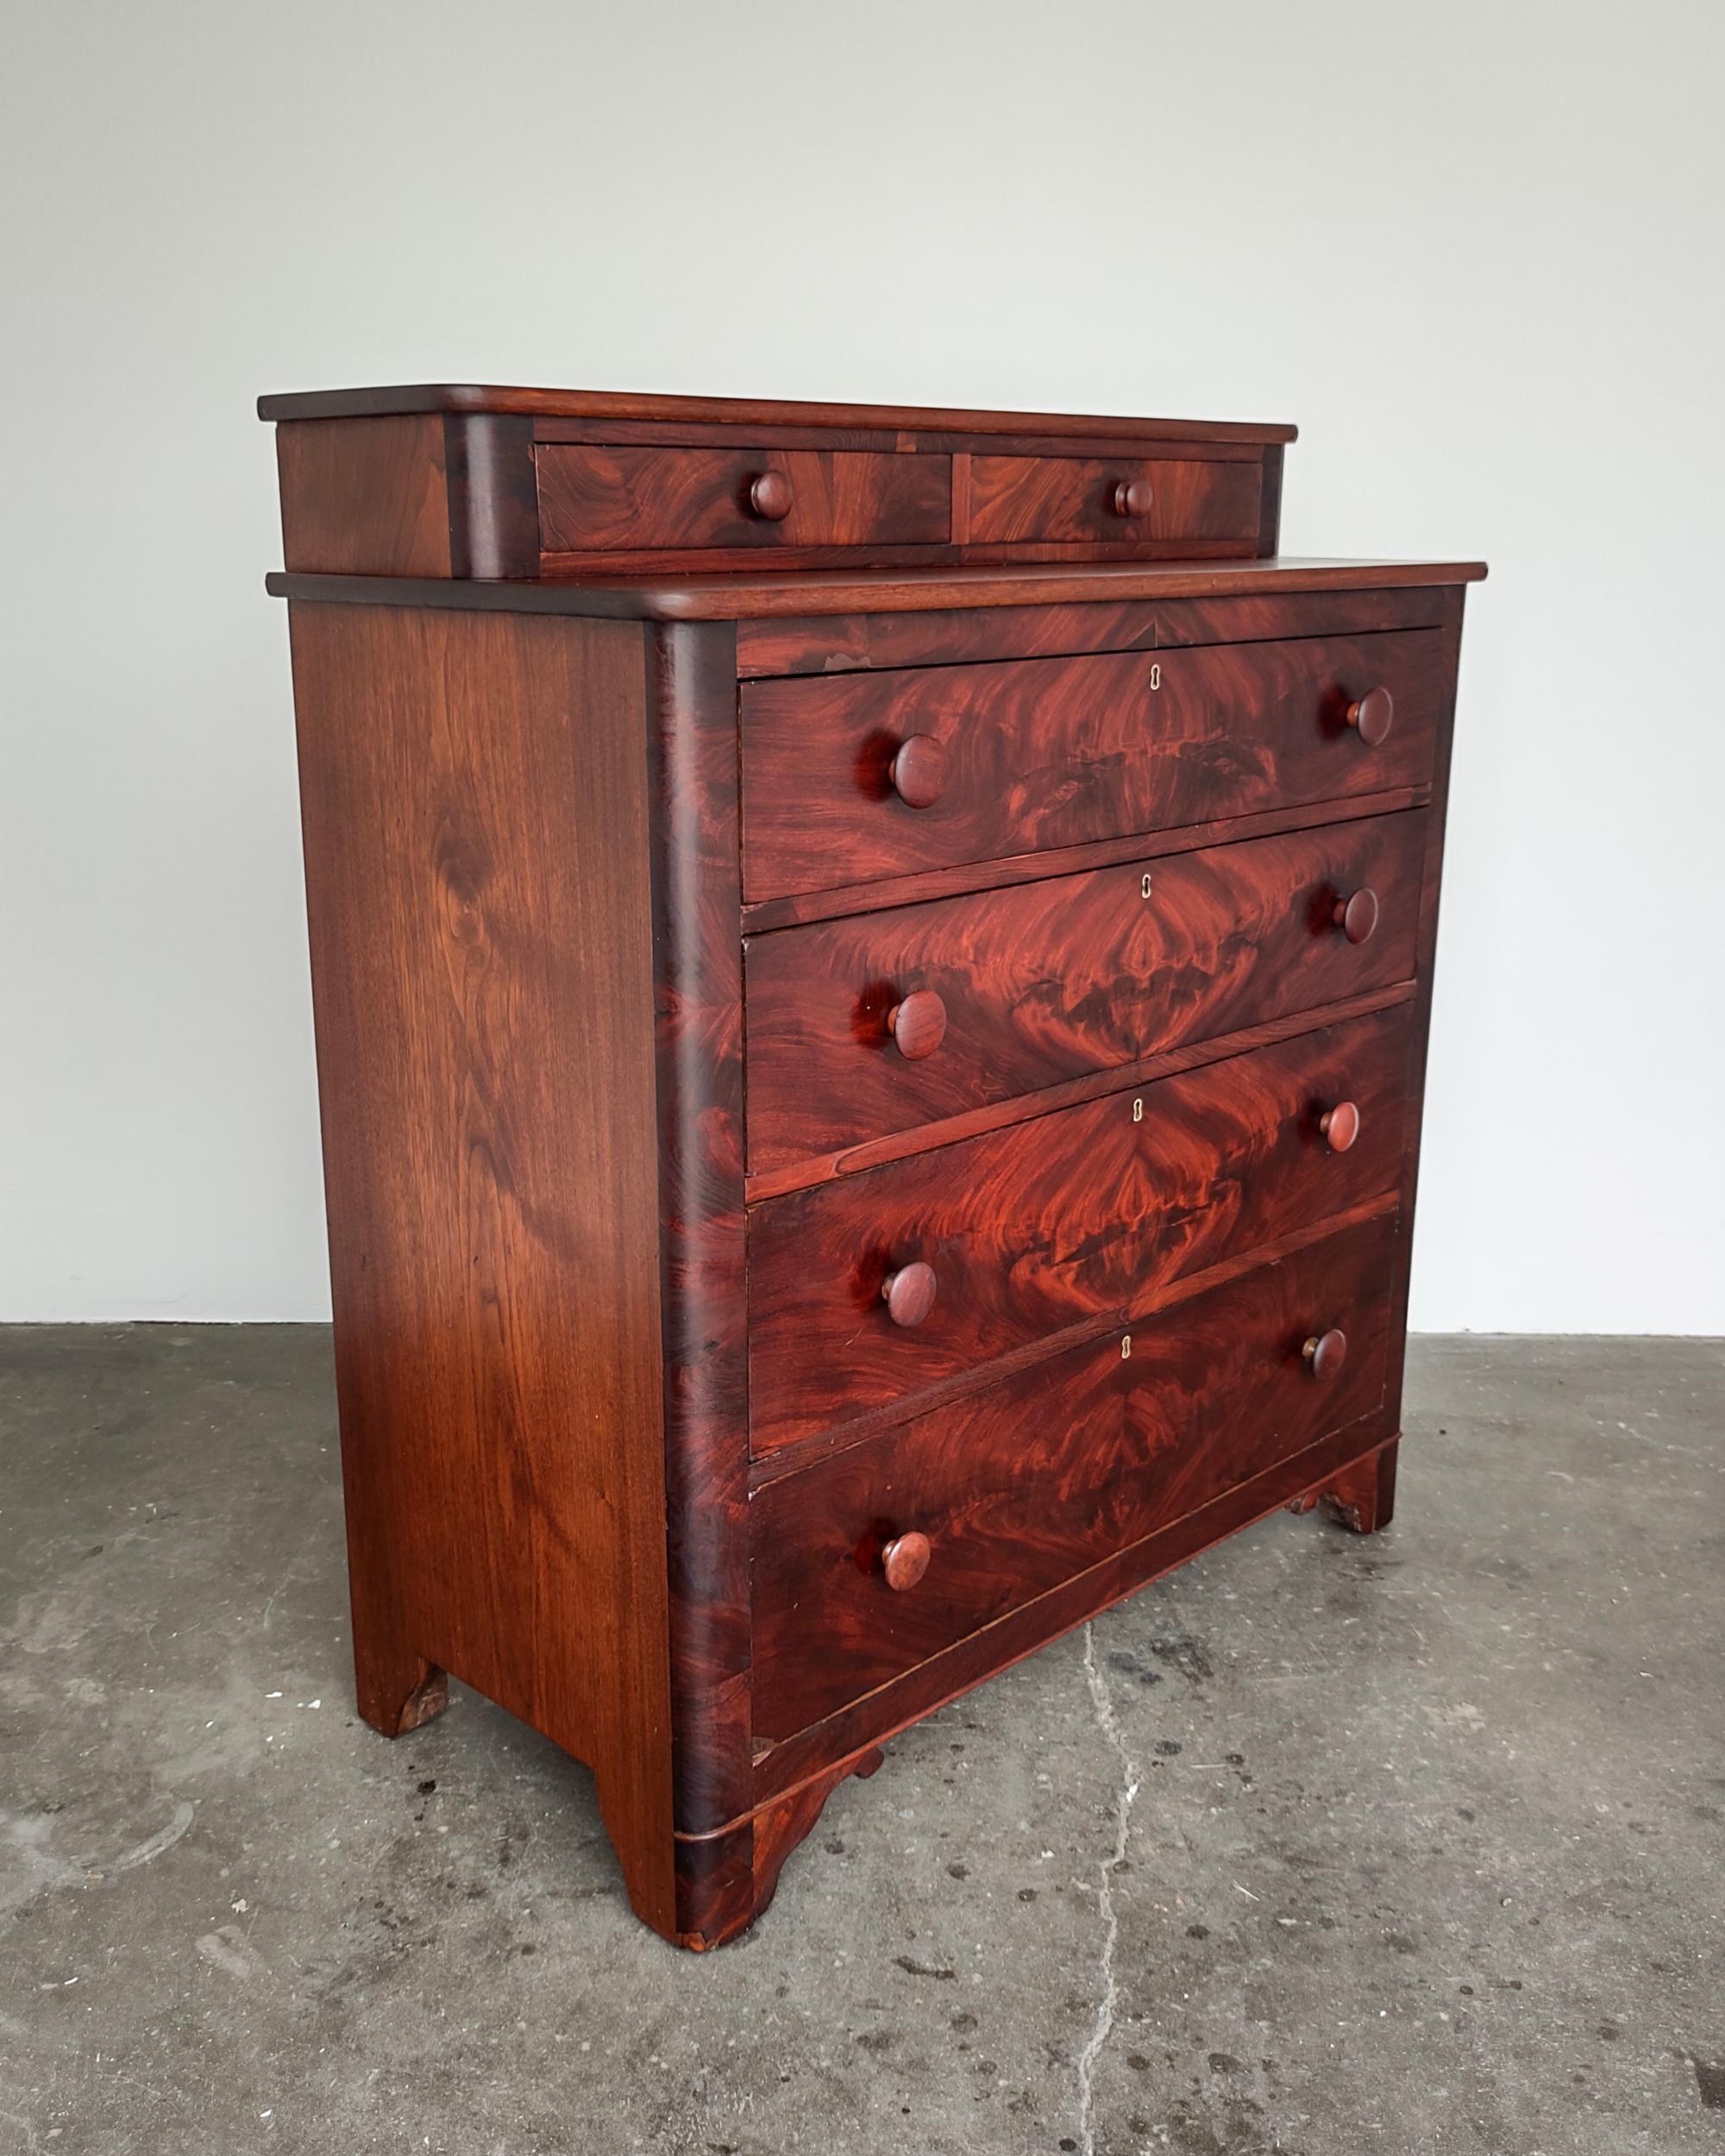 Rare Late 19th Century Flame Walnut Highboy Dresser English Empire Antique In Good Condition For Sale In Hawthorne, CA